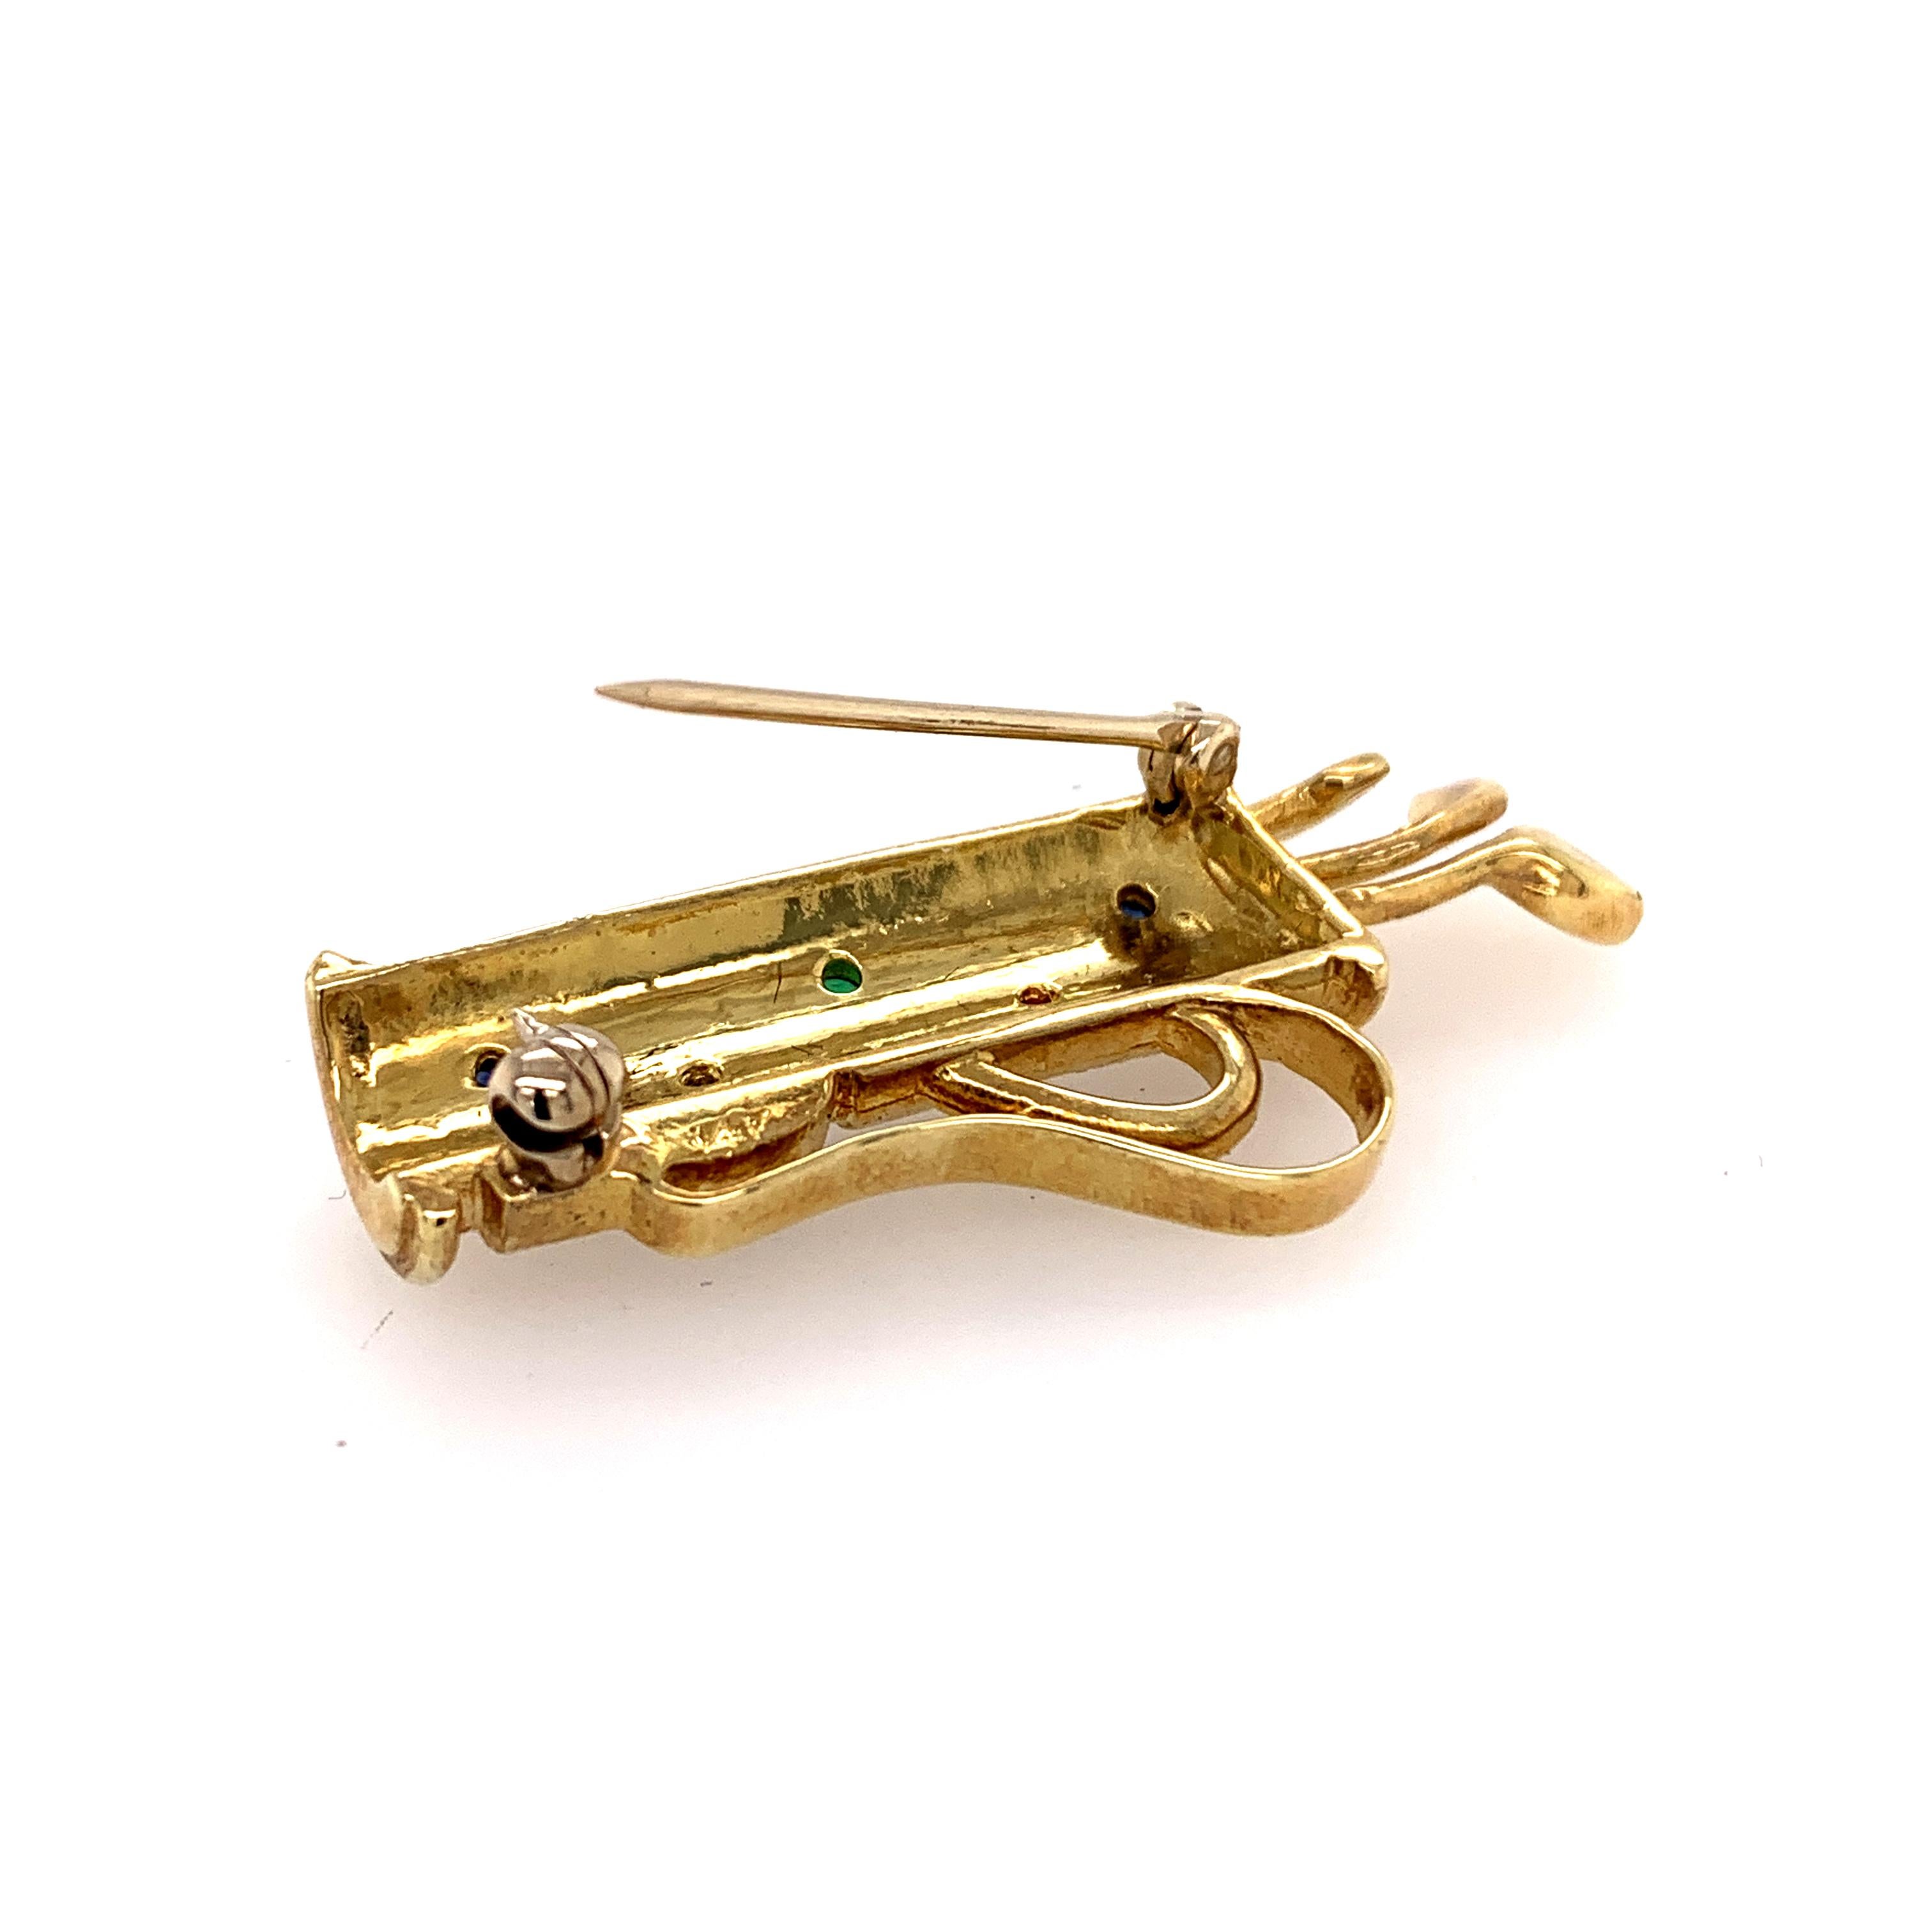 Gold Gemset Golf Club Bag Pin In Excellent Condition For Sale In New York, NY